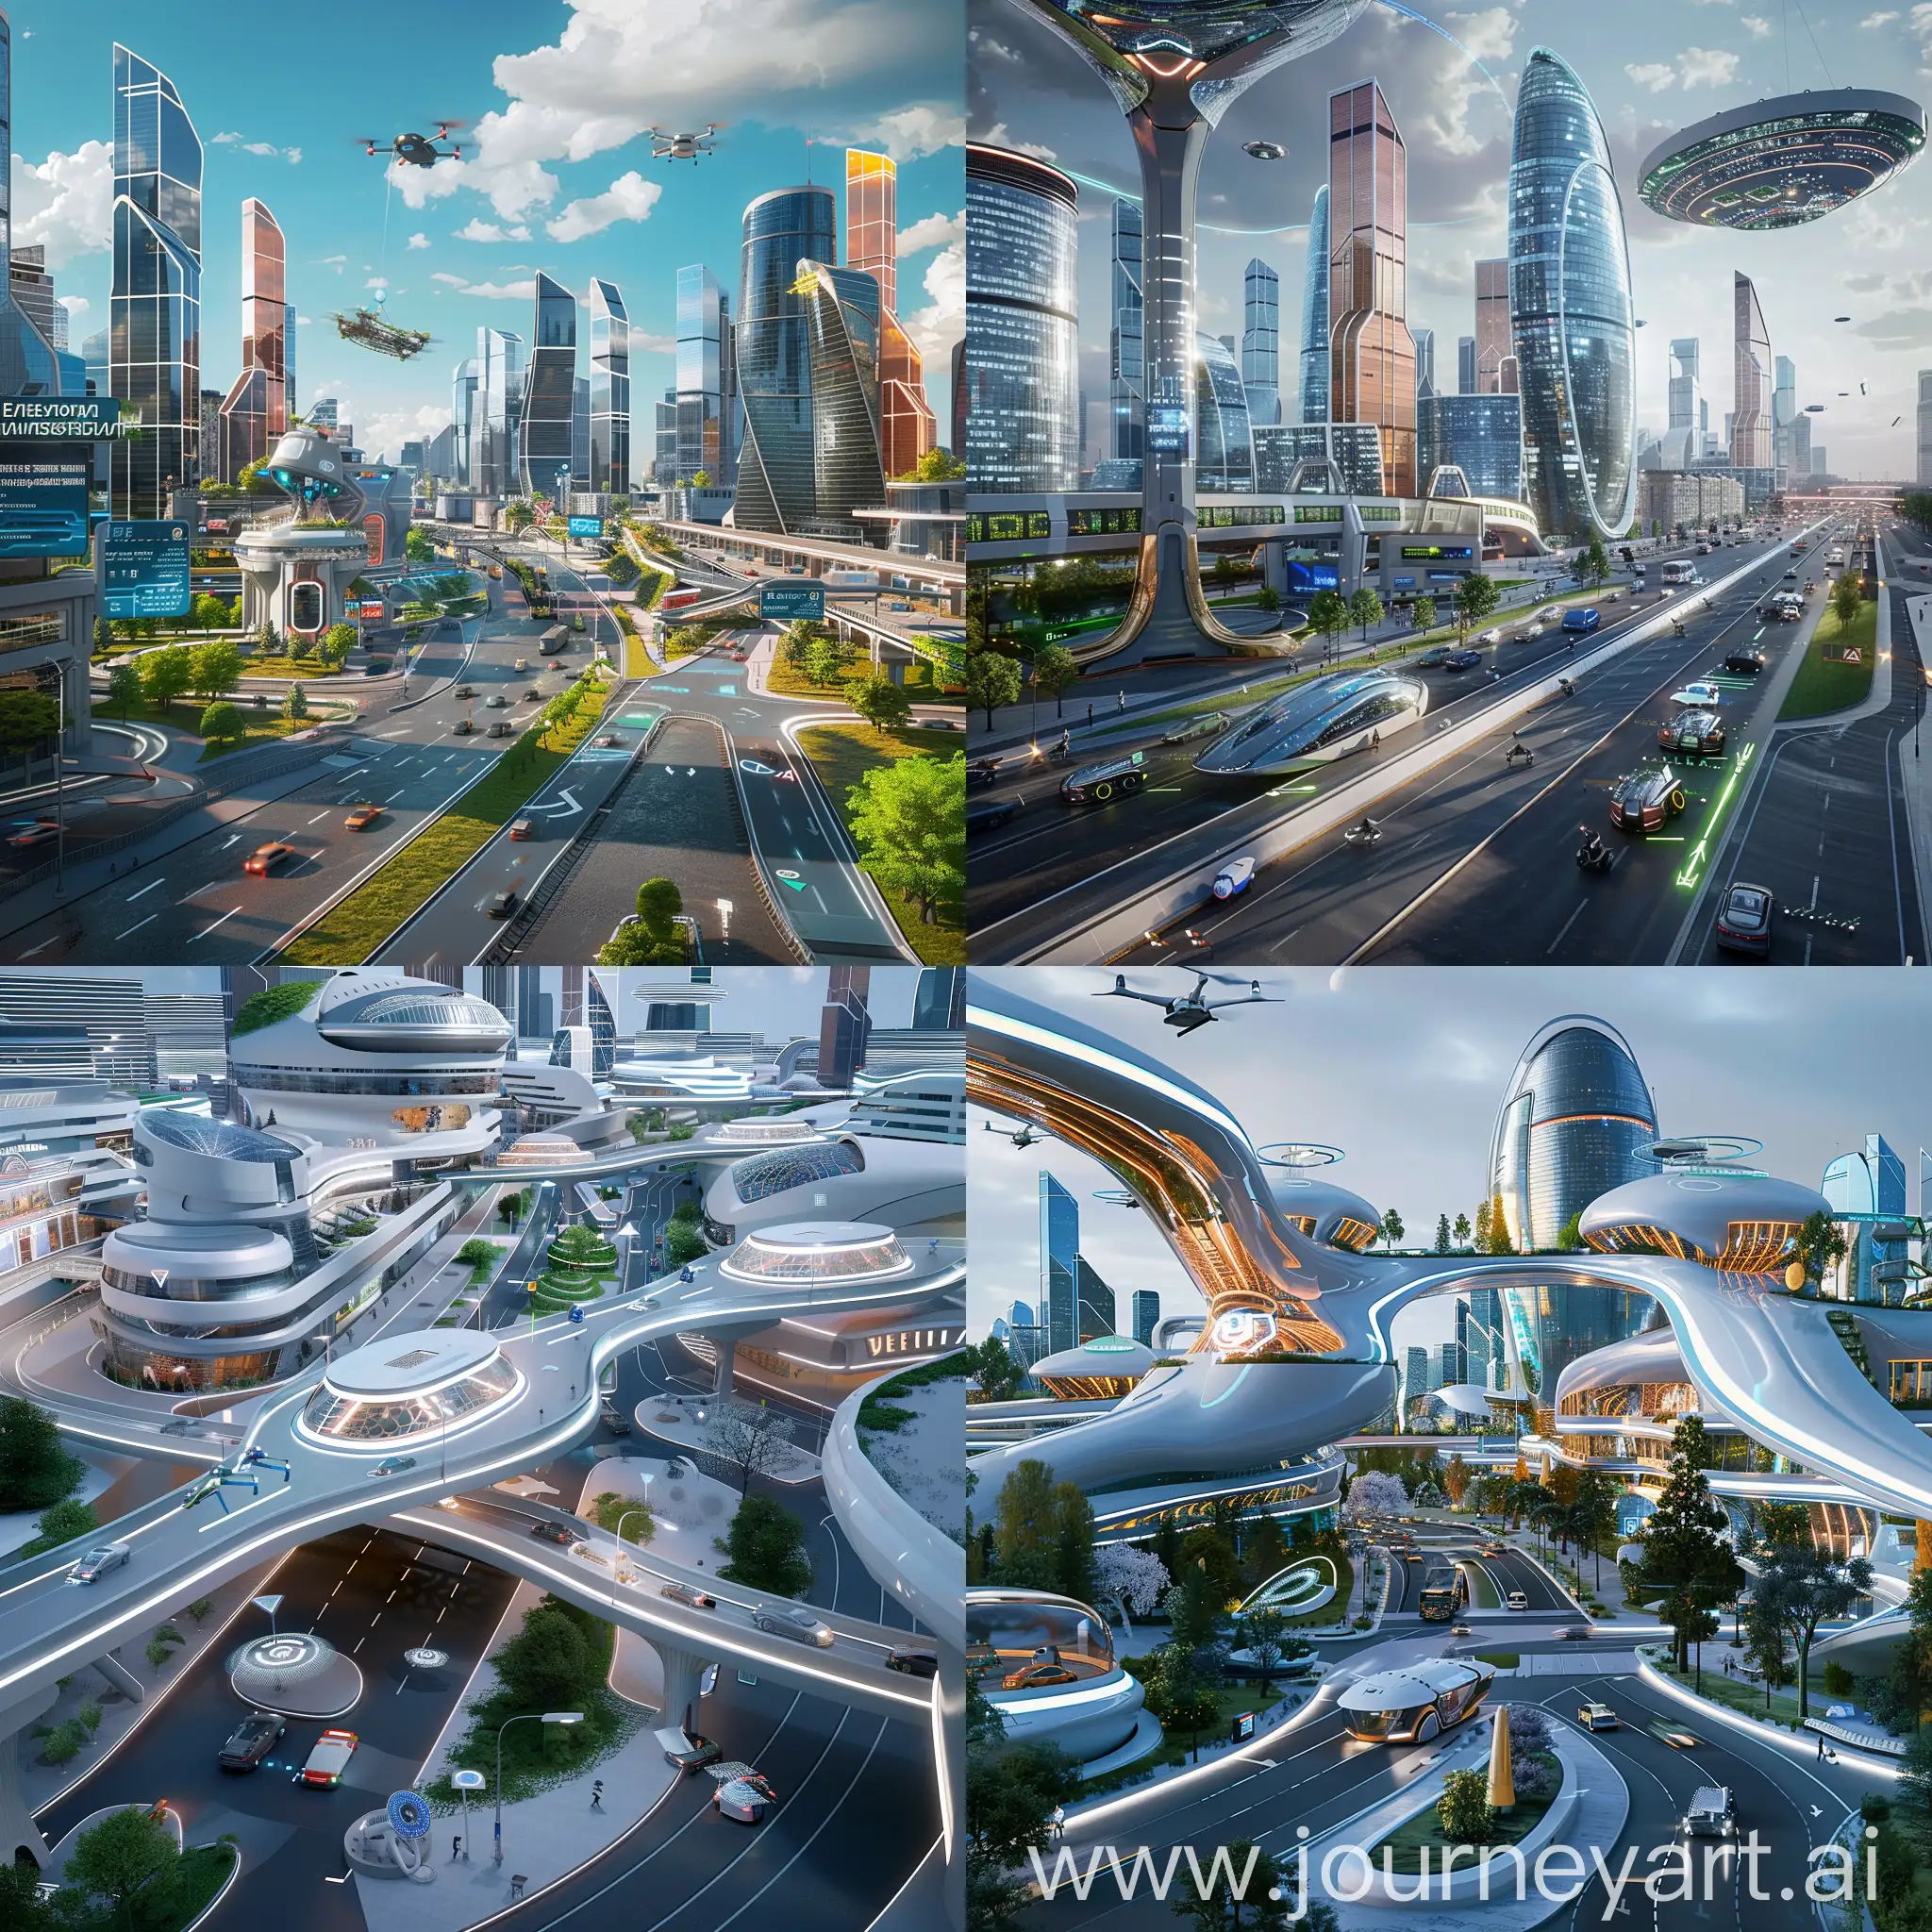 Futuristic-Moscow-Smart-City-Innovations-and-EcoFriendly-Infrastructure